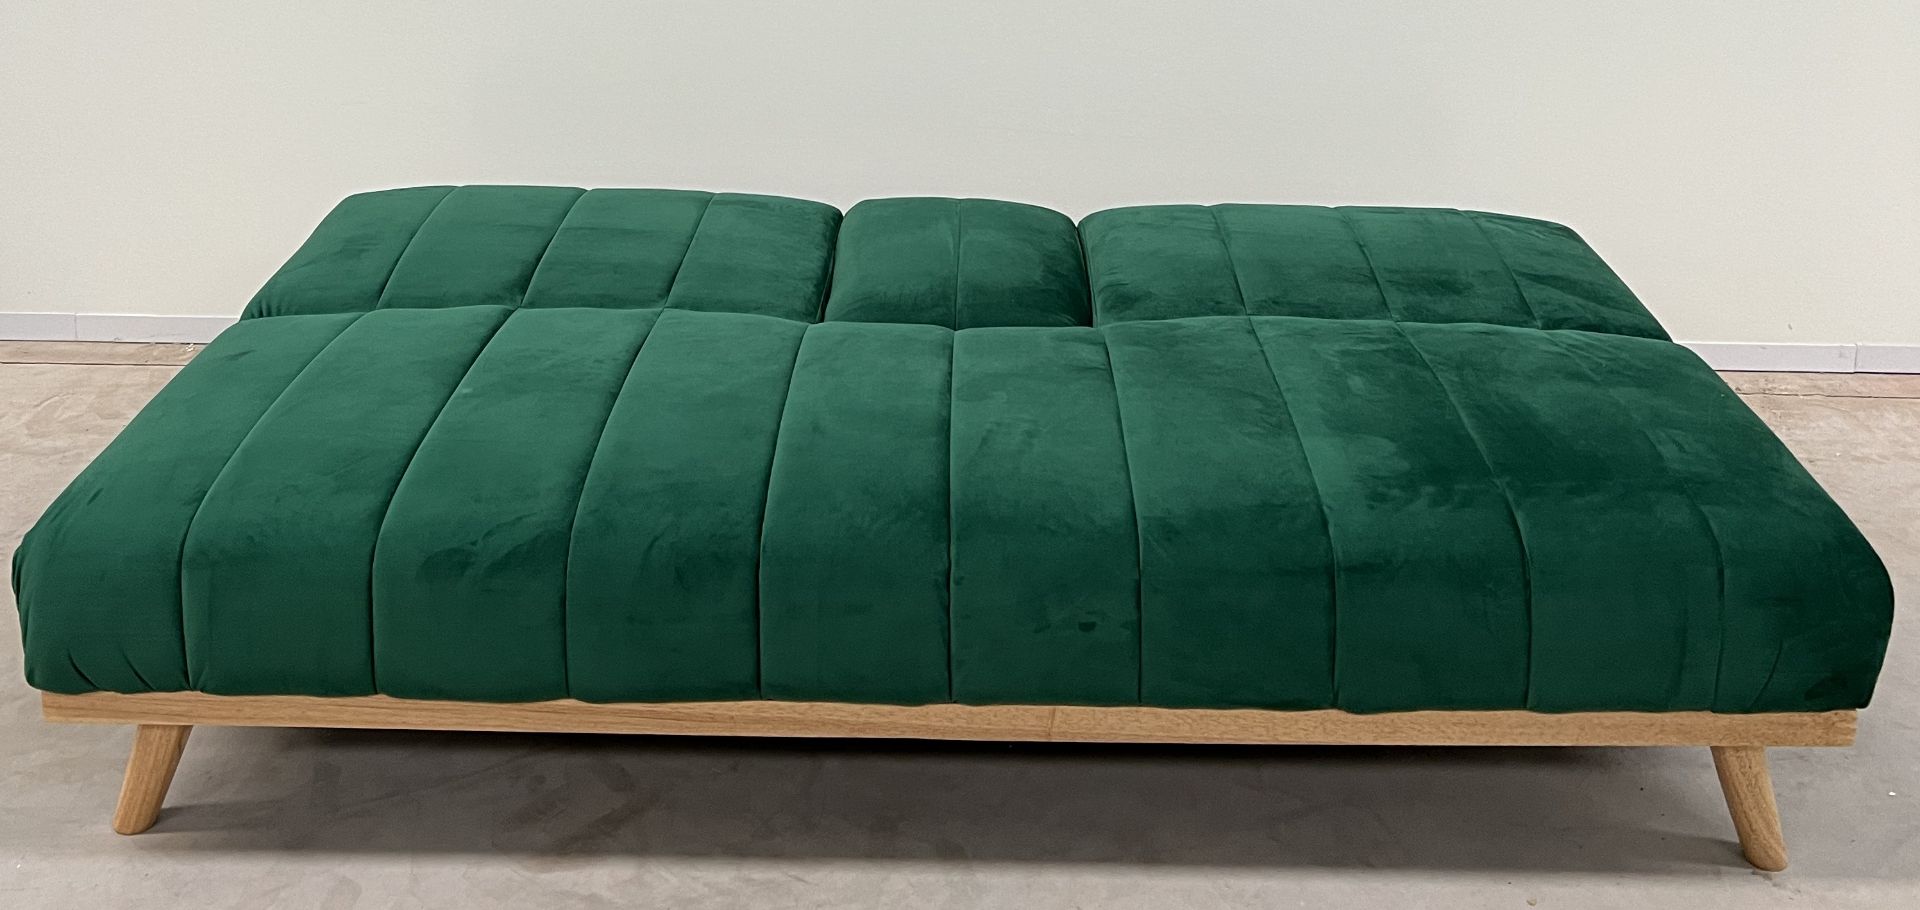 Etta Green Velvet 3 Seater Fold Down Sofa Bed Combines An Exciting Contemporary Shape With - Image 4 of 4